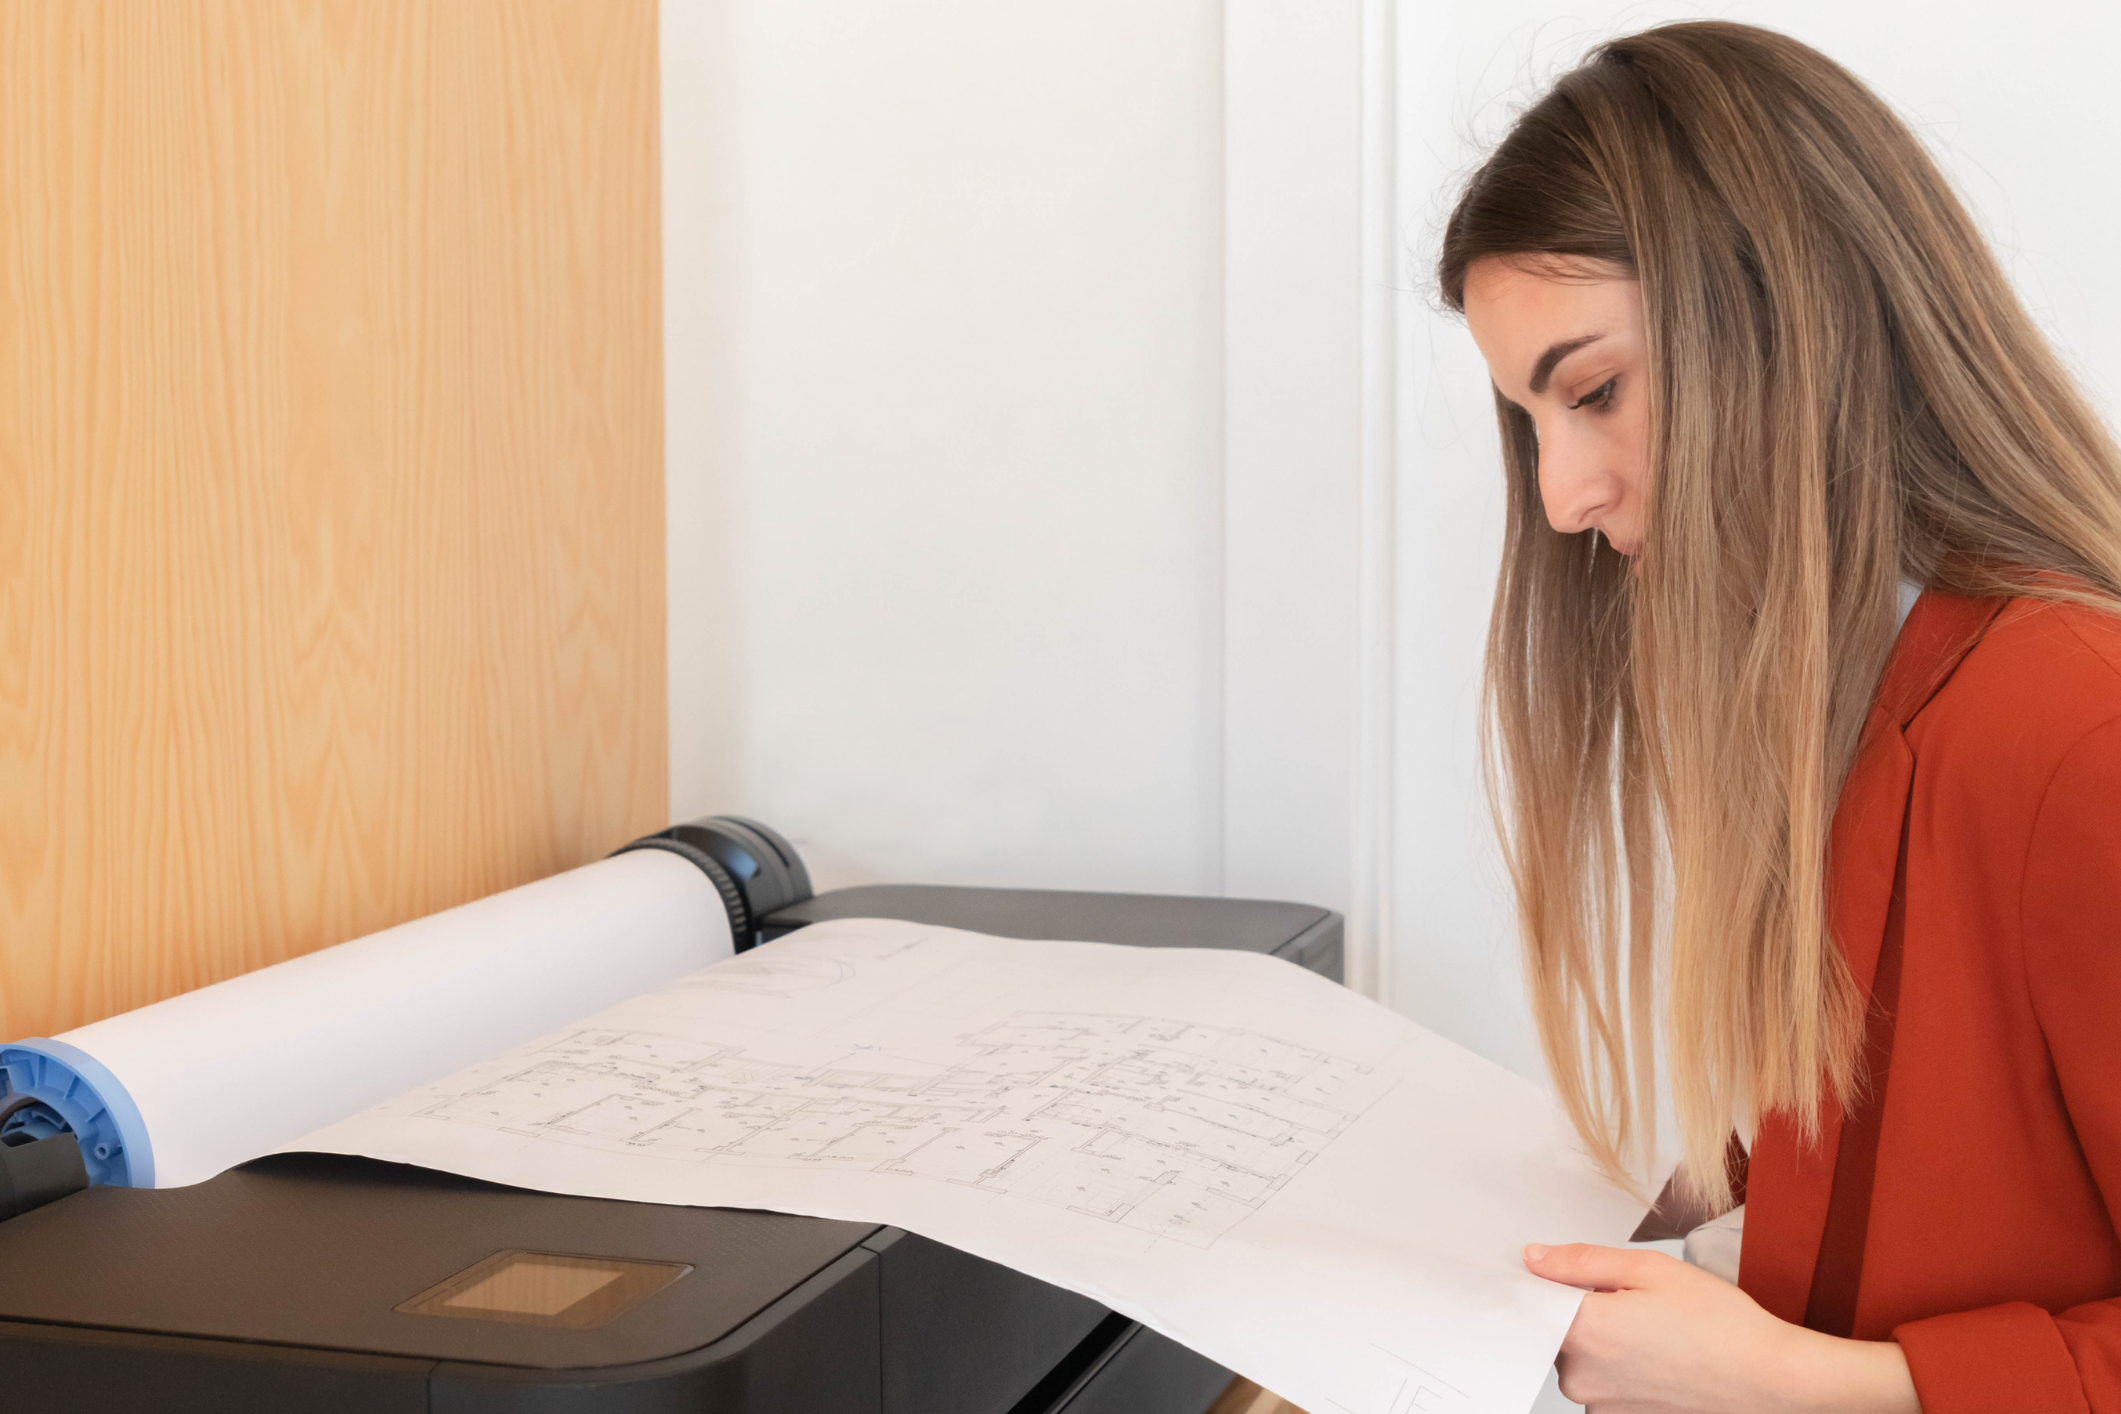 A woman reviews a large printed sheet of architectural or construction drawings as it is printed out from a wide format printer.